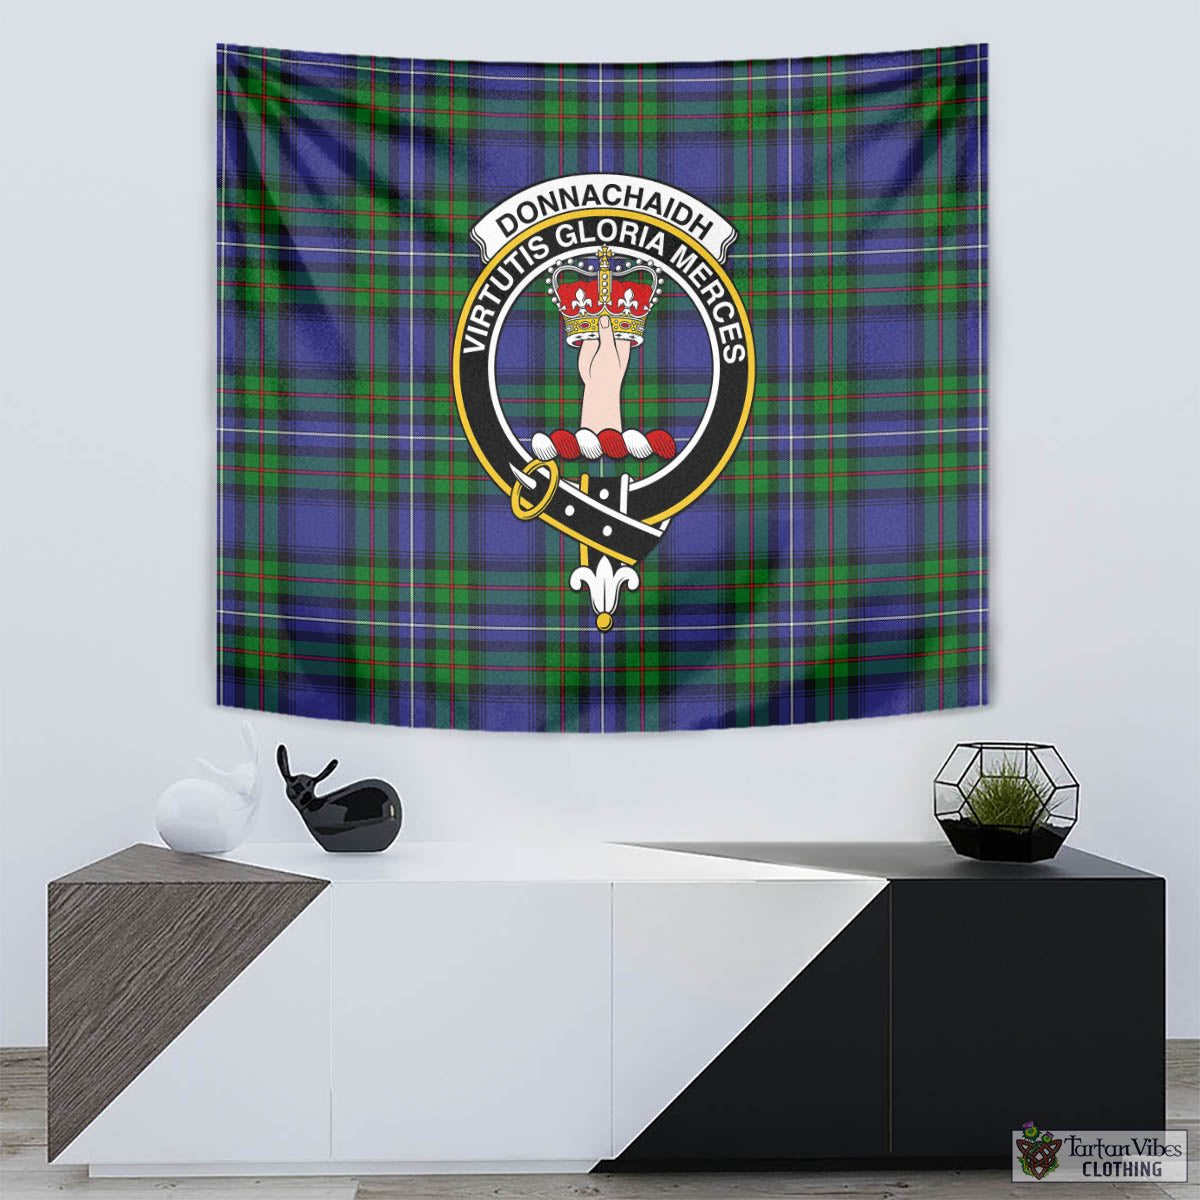 Tartan Vibes Clothing Donnachaidh Tartan Tapestry Wall Hanging and Home Decor for Room with Family Crest